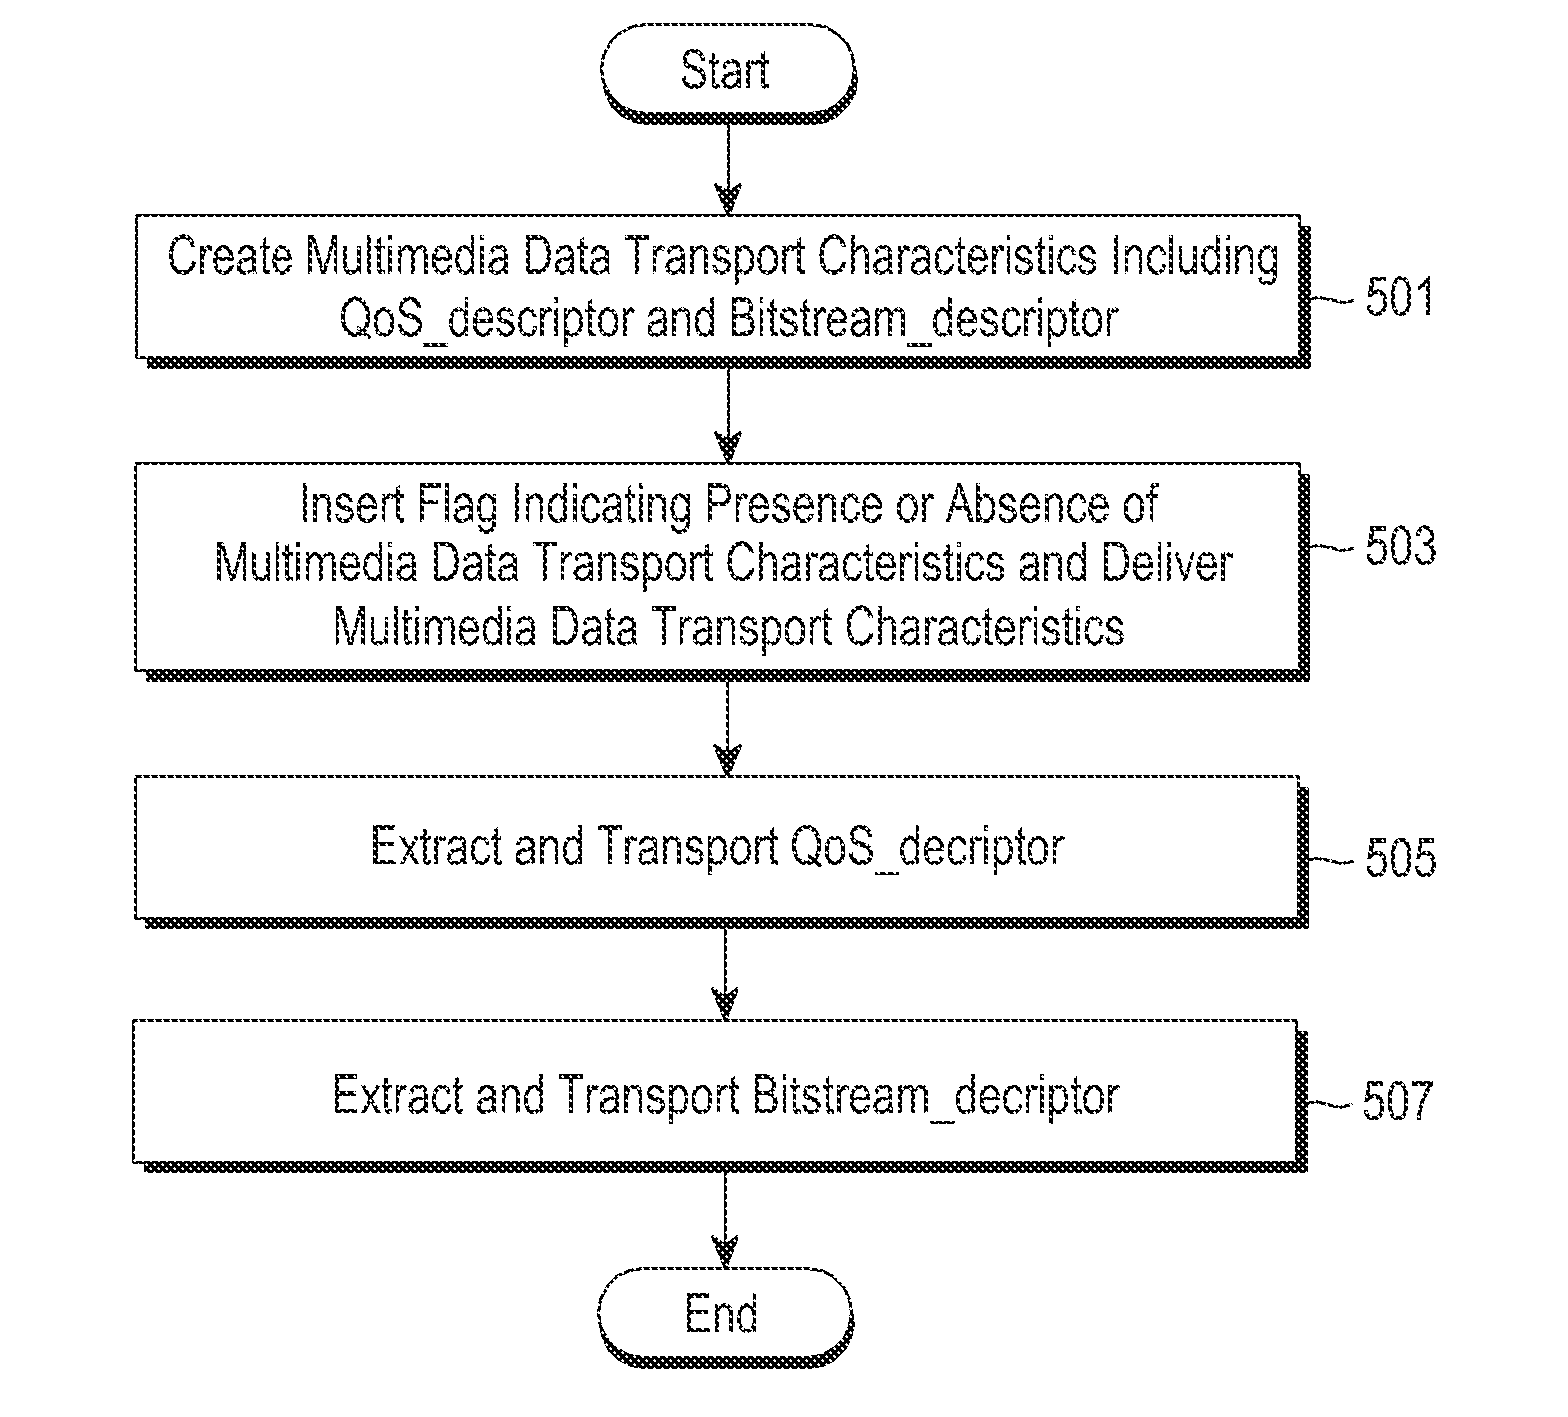 Apparatus and method for delivering transport characteristics of multimedia data